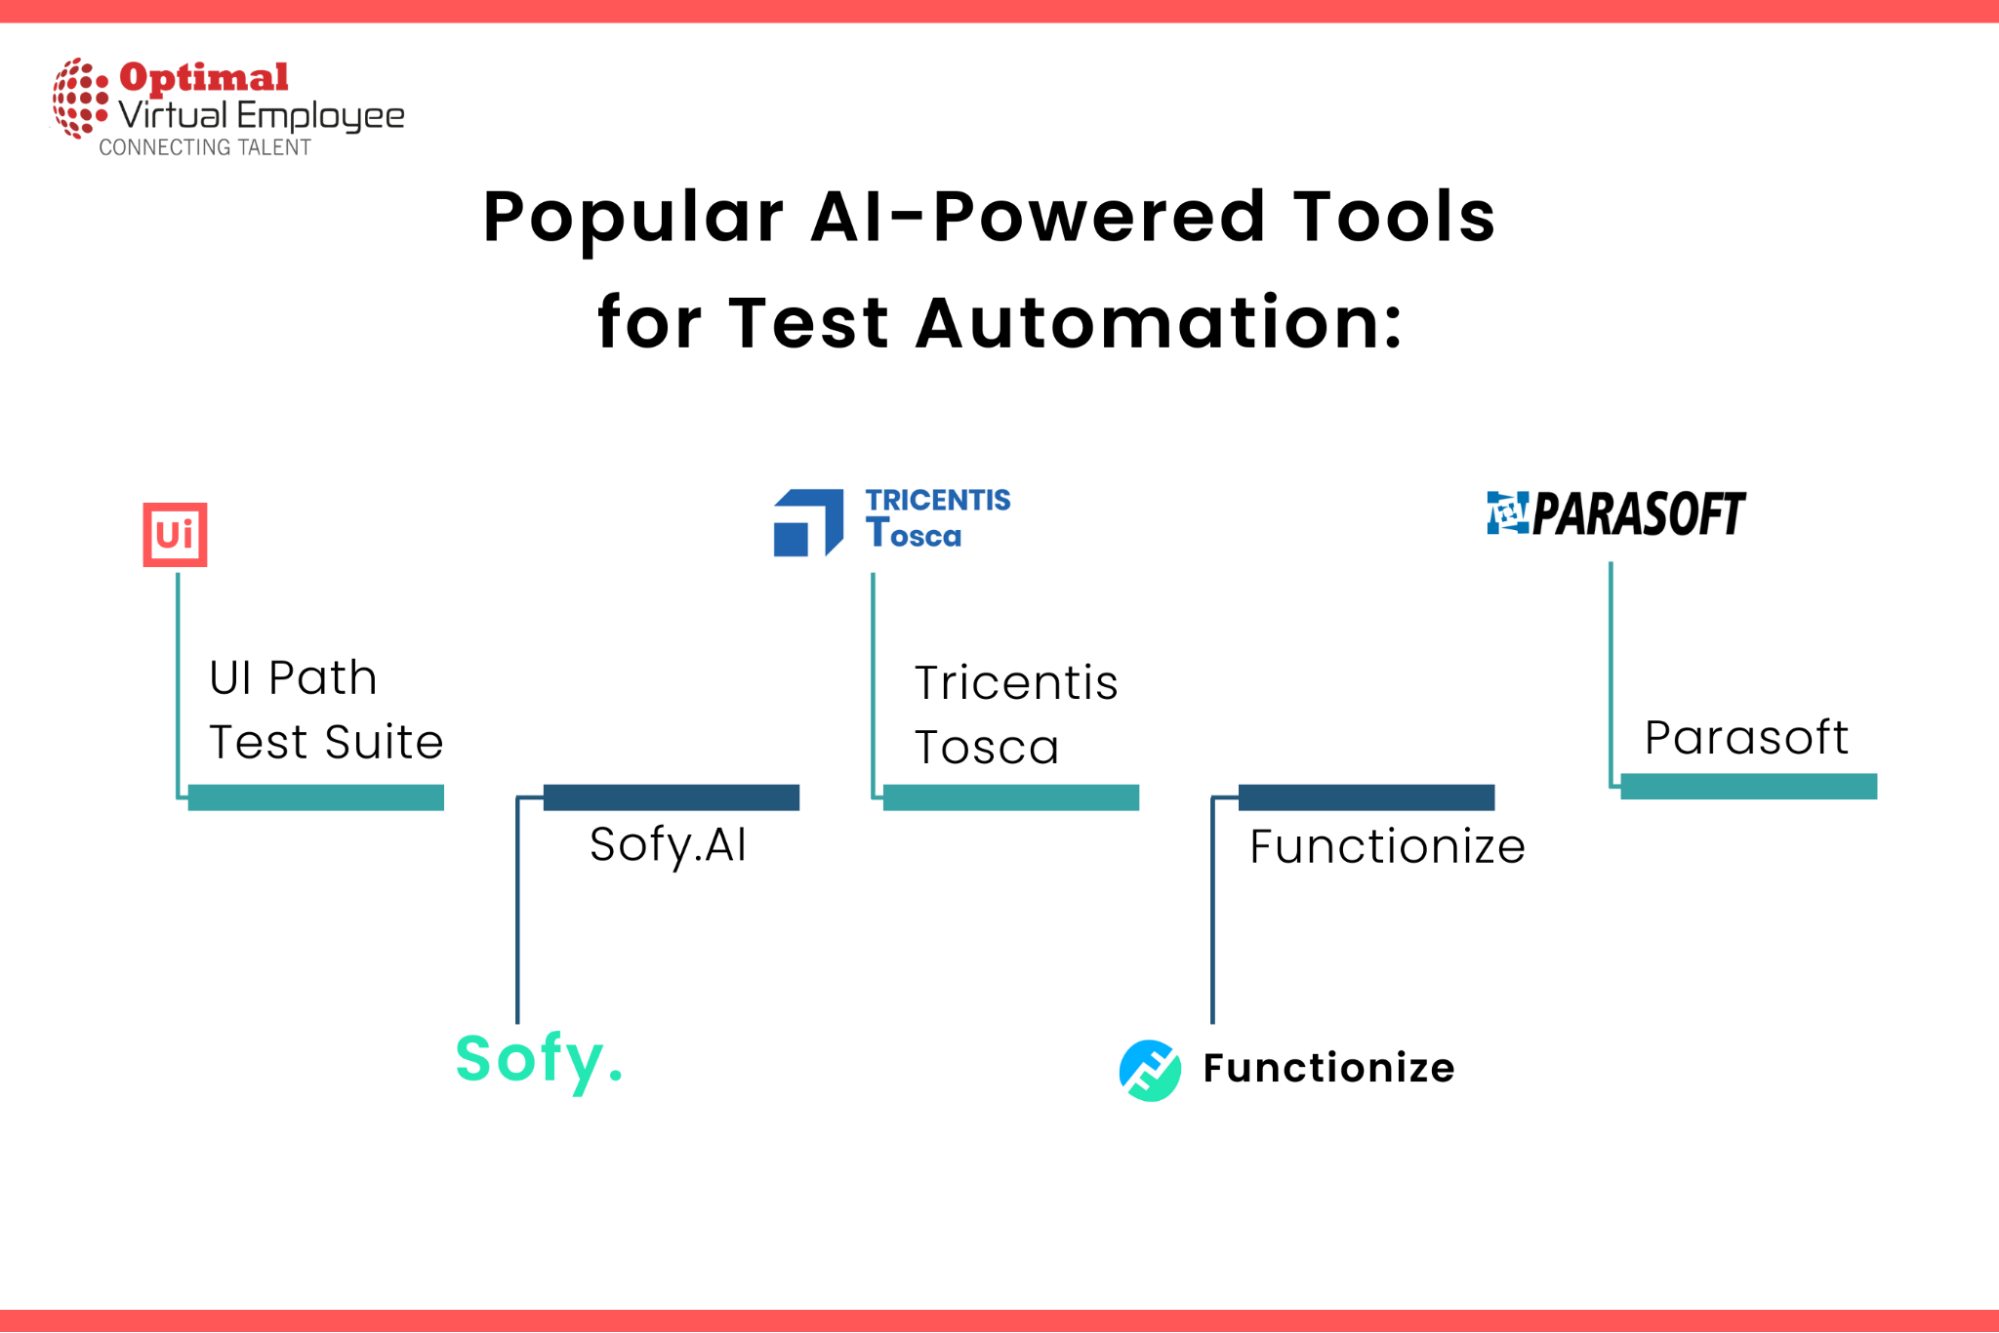 Top 5 Popular AI-Powered Tools for Test Automation